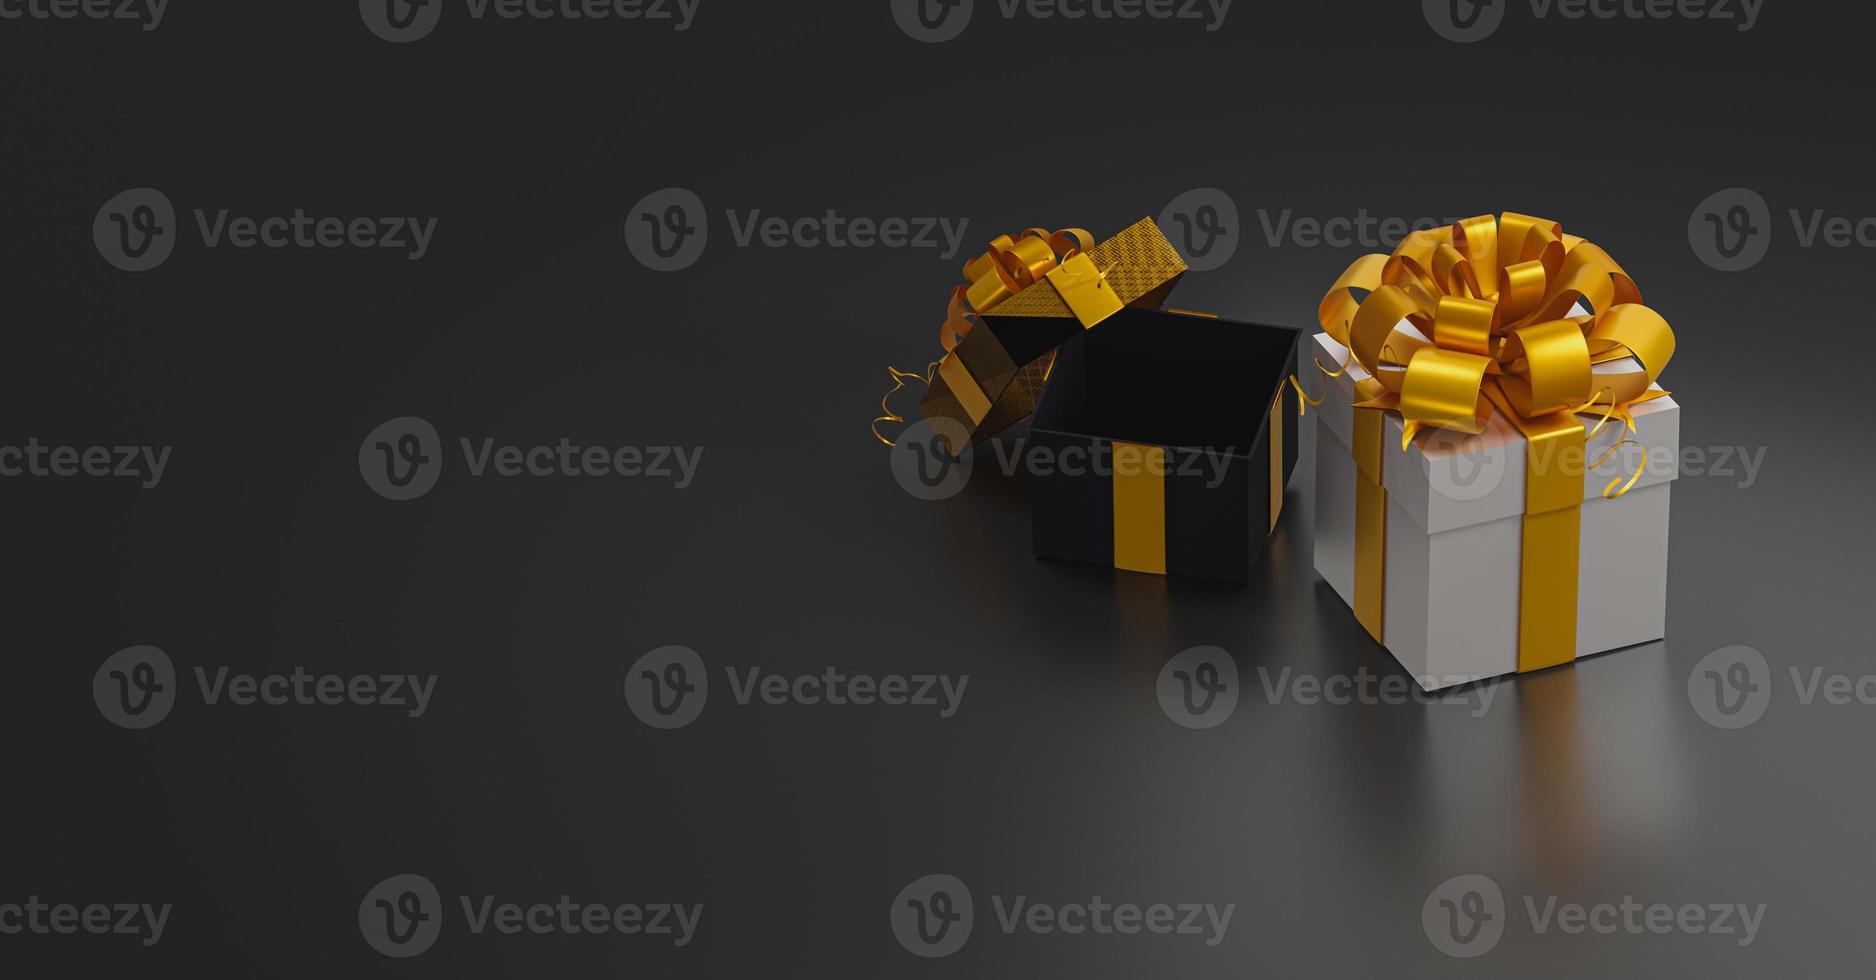 Gift box for Black Friday concept photo